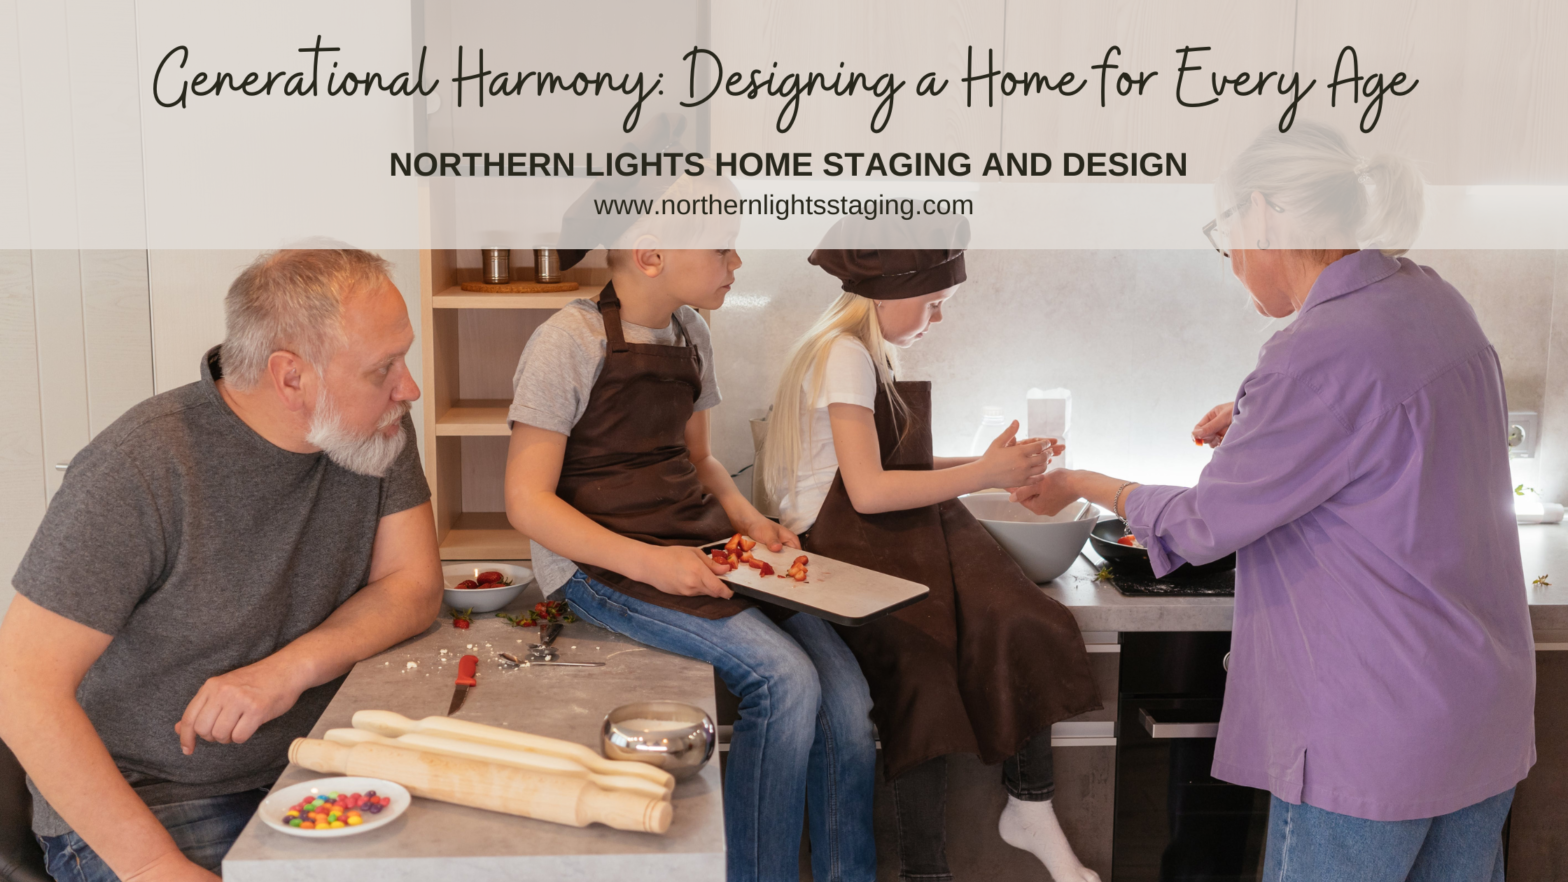 Generational Harmony: Designing a Home for Every Age